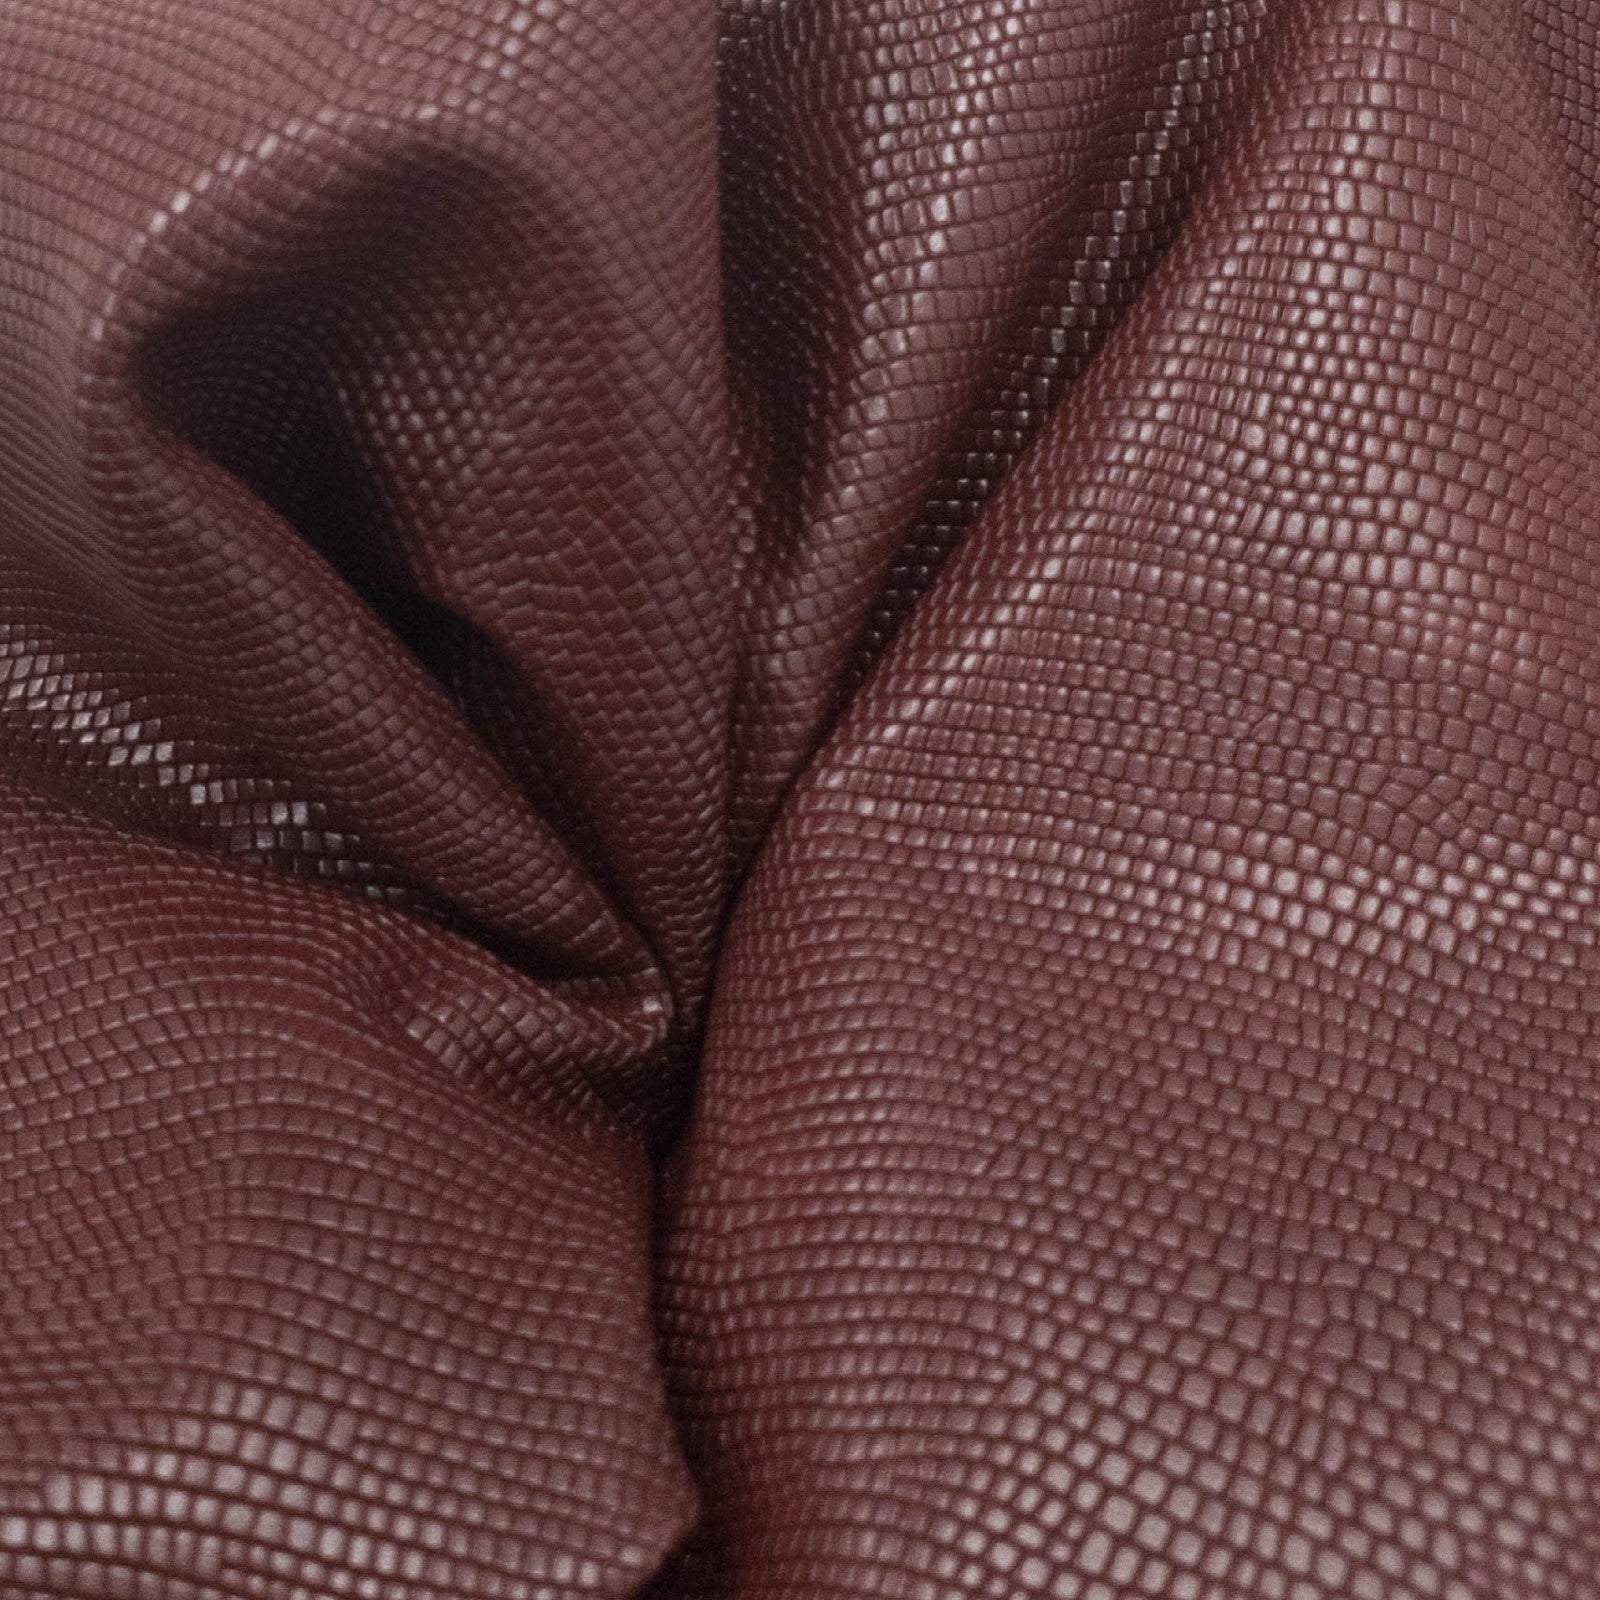 Reptile Embossed, 3-4 oz, 7-25 sq ft, Cow Sides, Brick-Fire Red / 7-10 | The Leather Guy